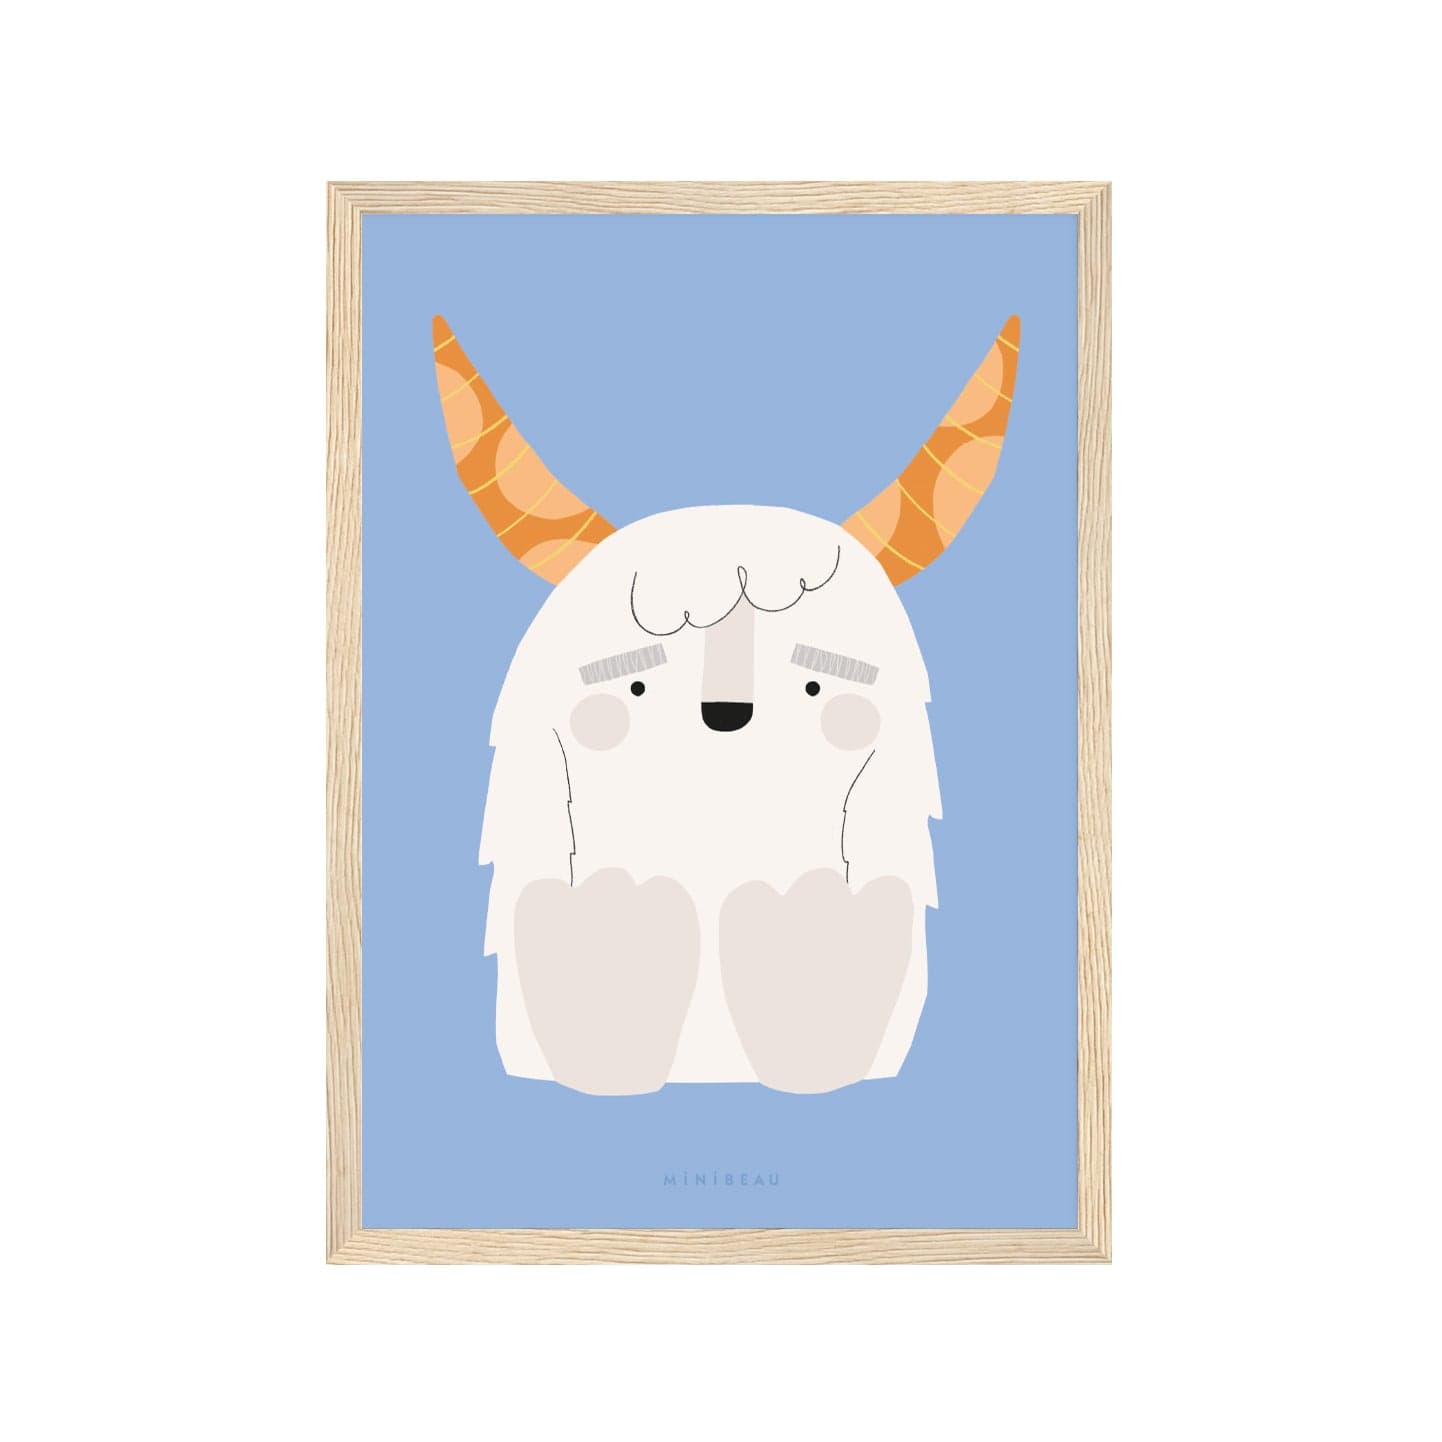 Art print in a light wood frame. Our Happy Alphabet 'Y' Art Print shows a smiling white Yeti, with big brown horns, sitting to create a Y shape, on a light blue background.